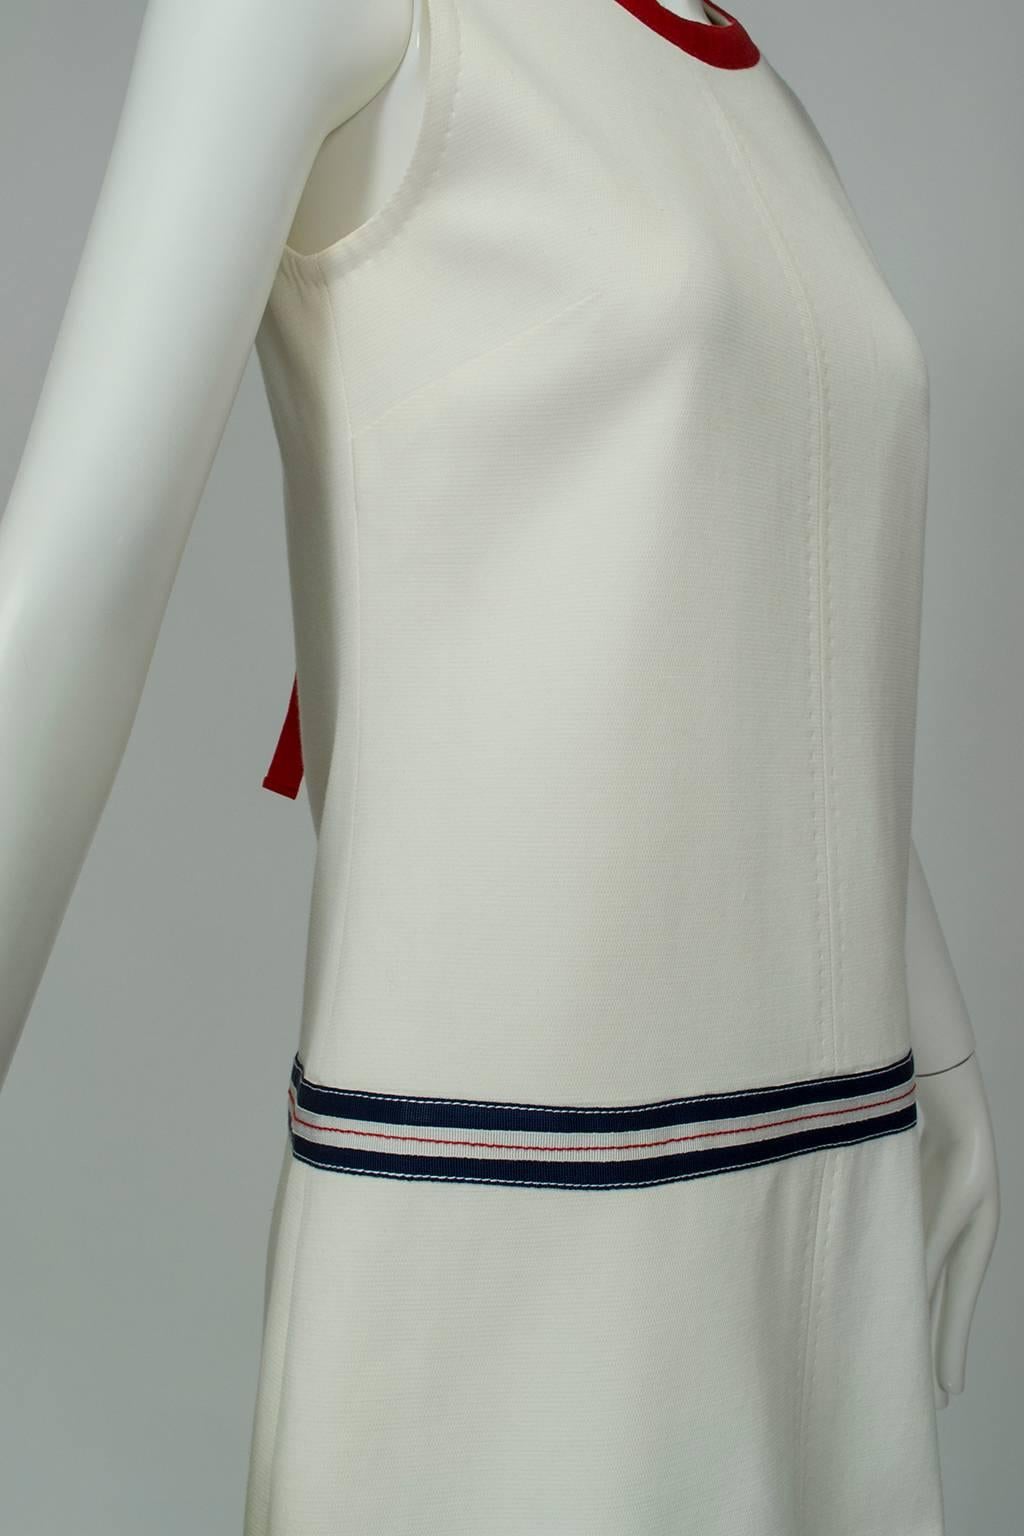 Dolce & Gabbana Mod Mini Dress with Nautical Trim and Rear Bow - Small, 2005 In Excellent Condition In Tucson, AZ